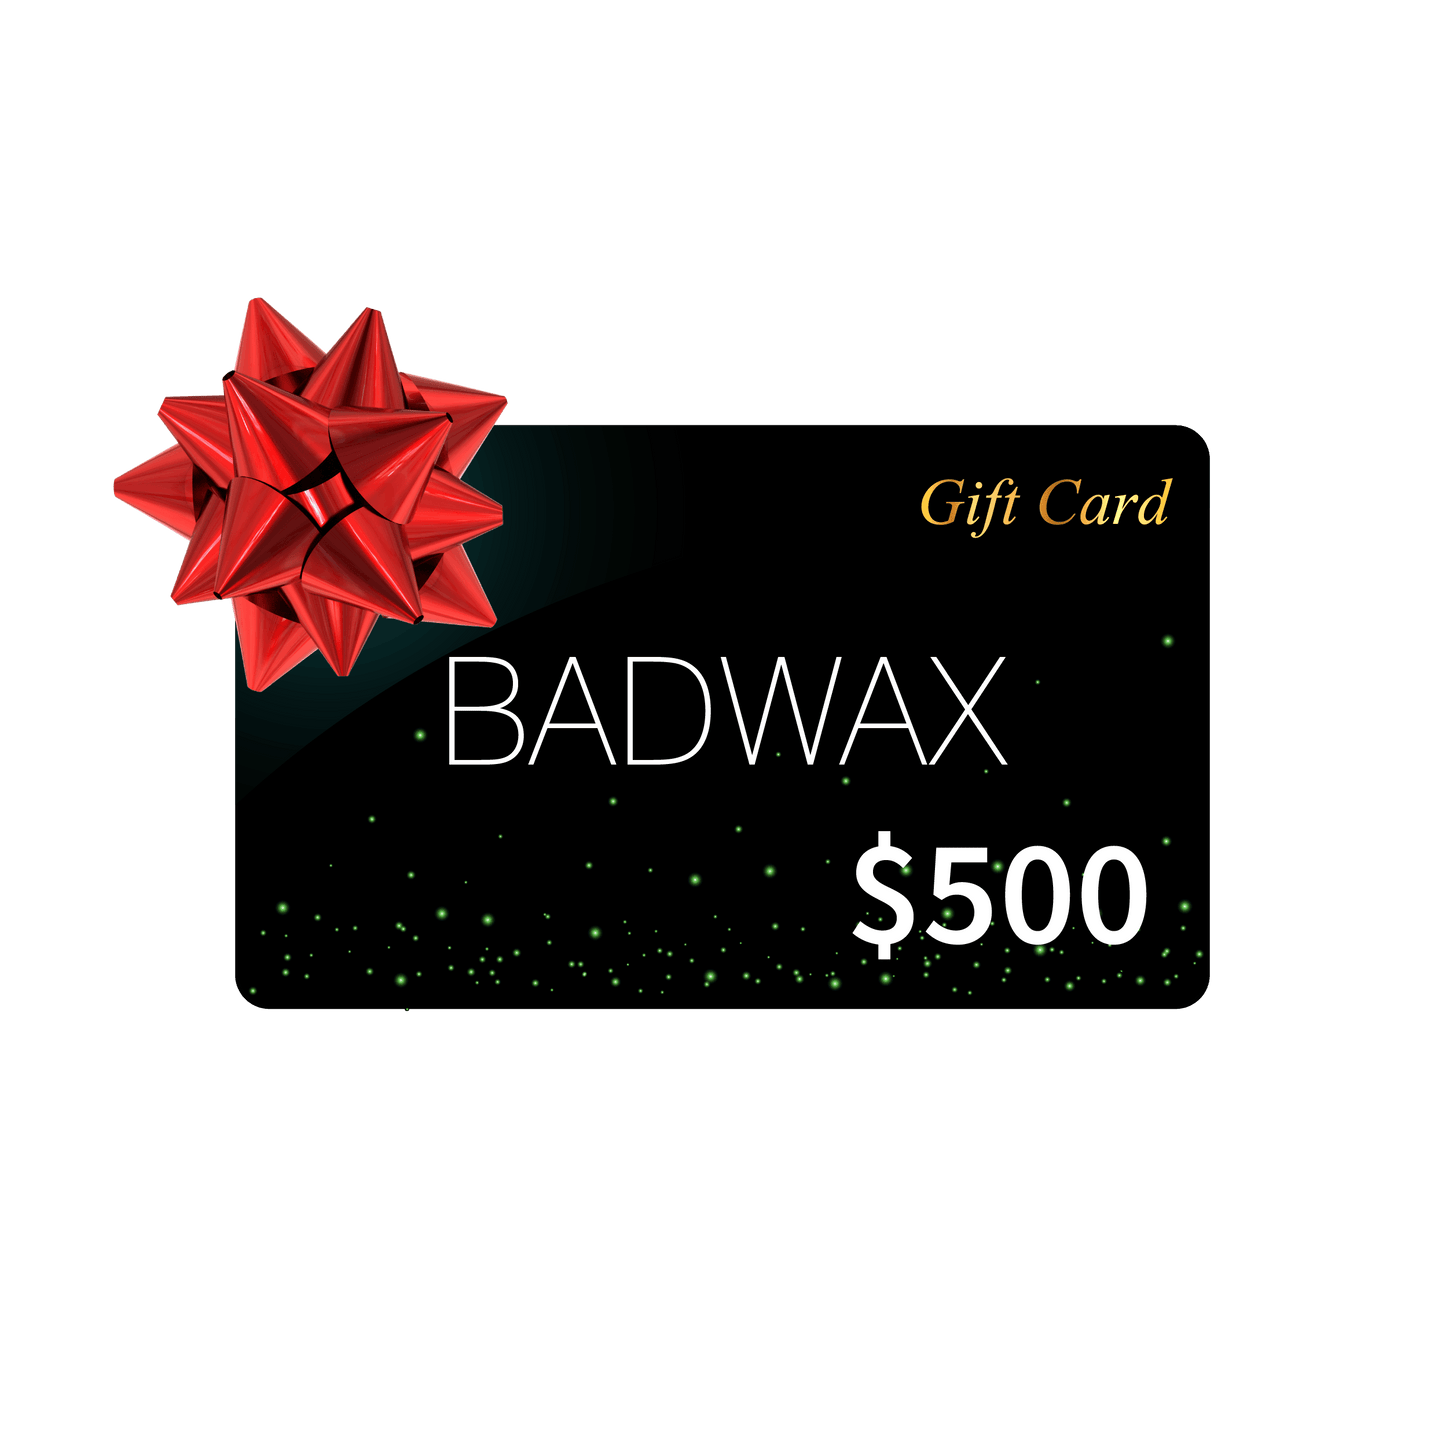 Gift Card - BADWAX